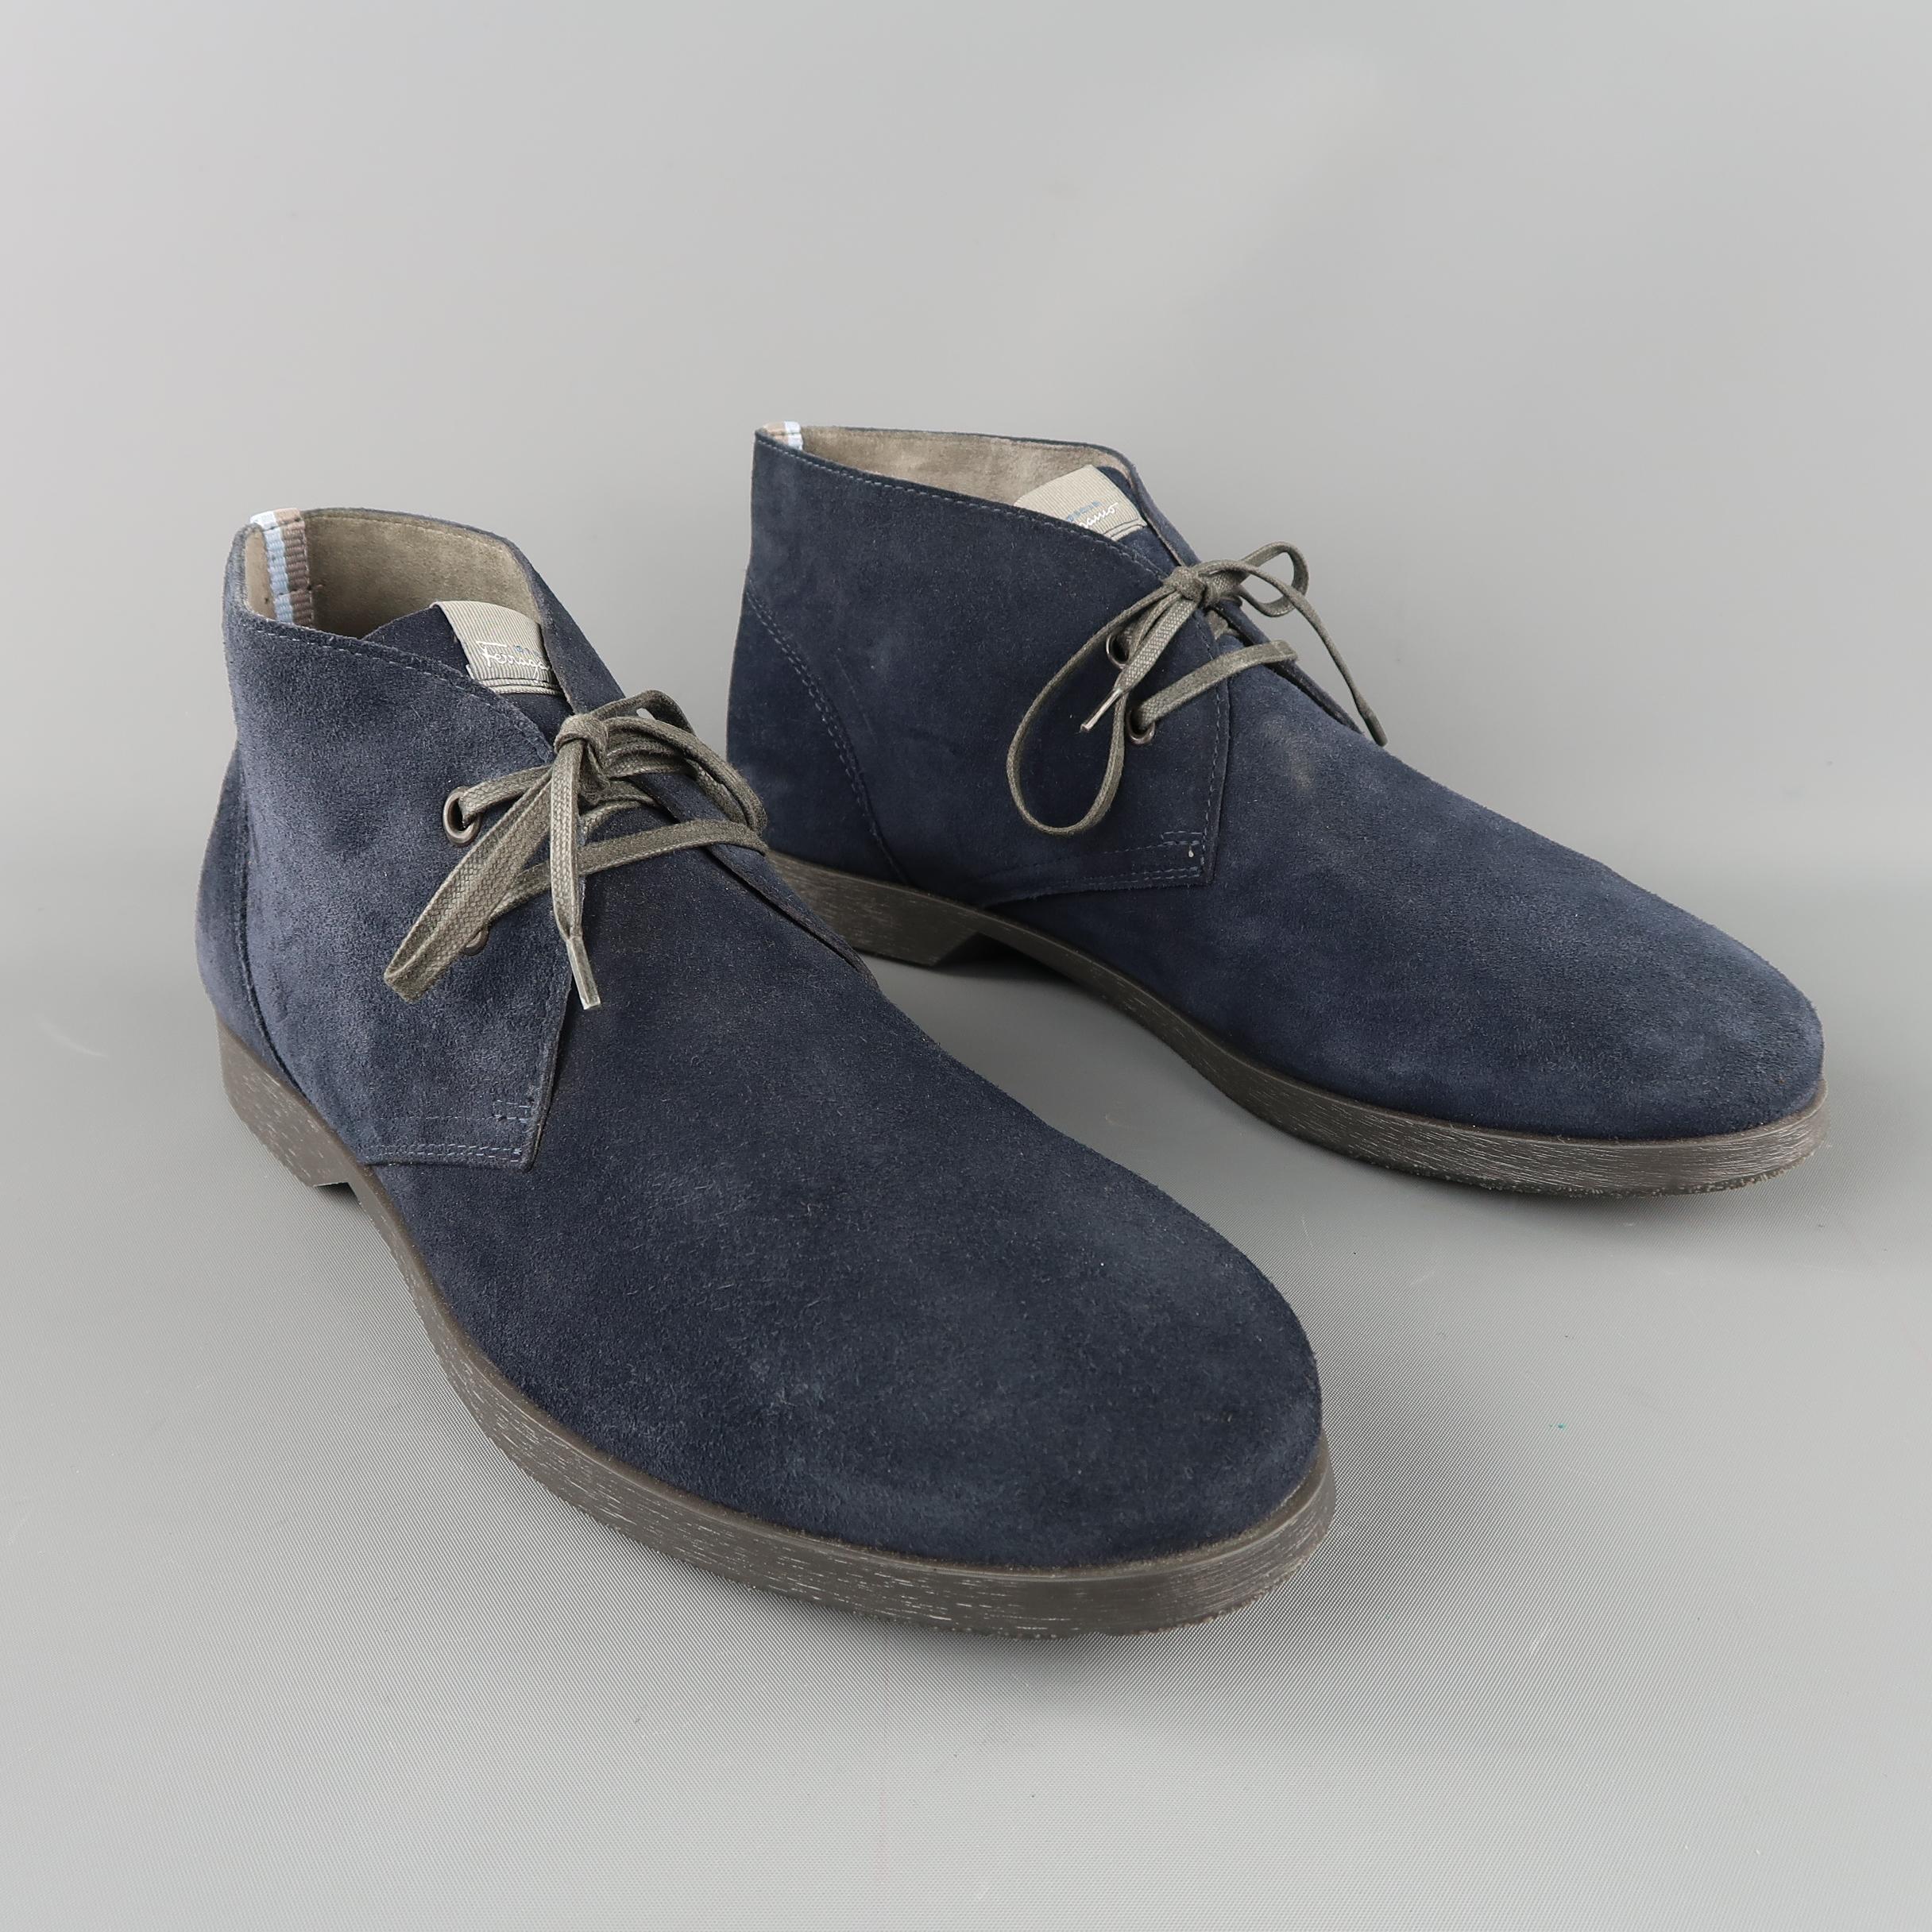 SALVATORE FERRAGAMO chukka boots are in navy solid suede, with blue and grey trim detail on the back, rubber sole and  lace up. Made in Italy.
 
Excelent Pre-Owned Condition.
Marked: 10 UK
 
Measurements:
Outsole: 12  x 3  in.